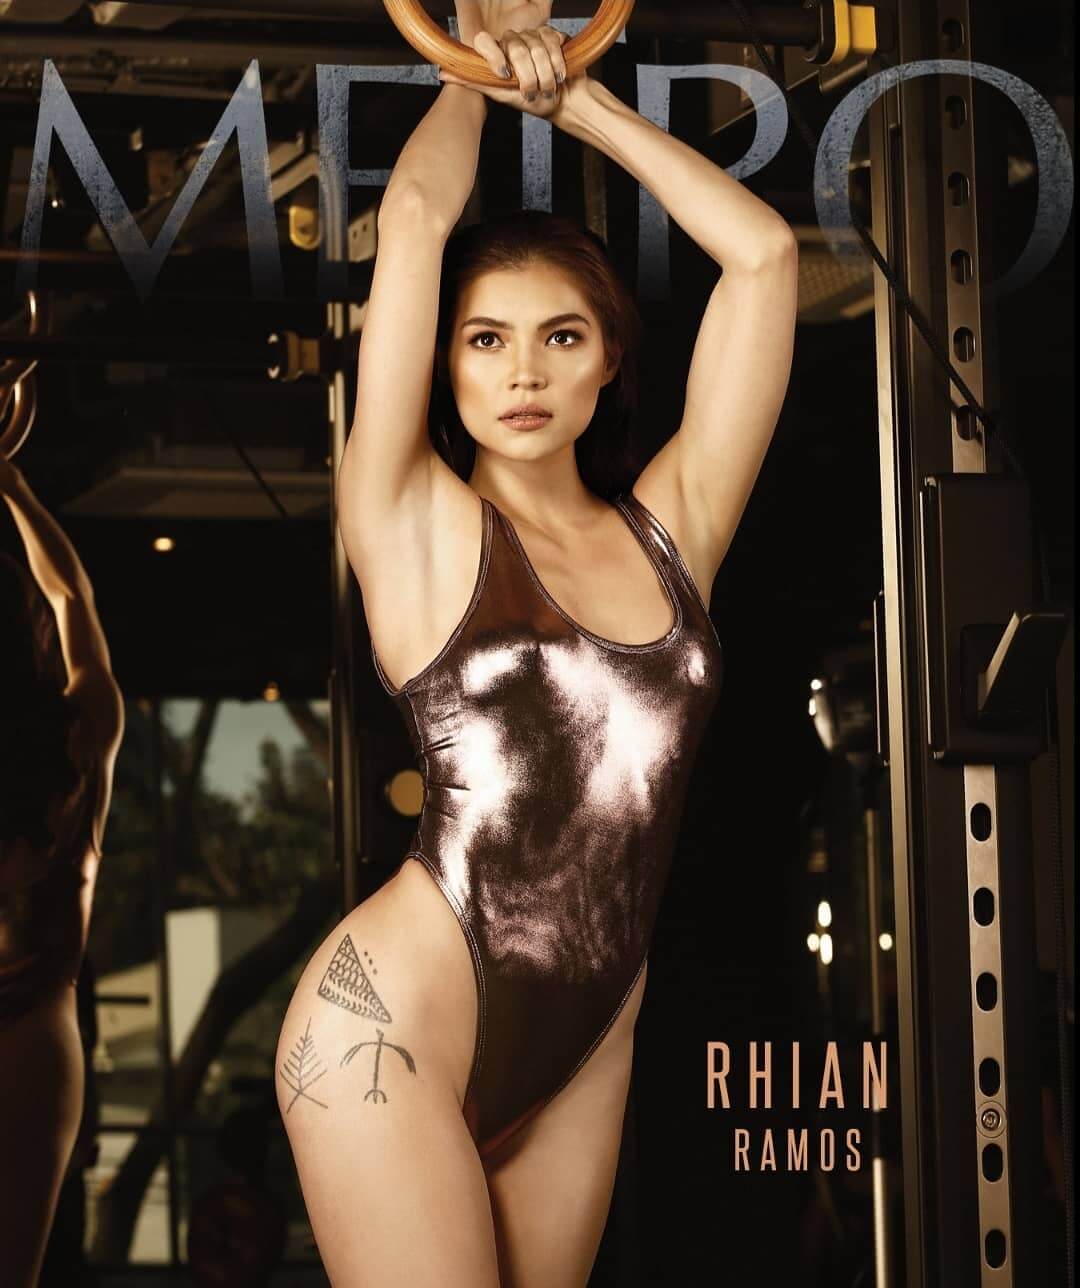 49 Hot Pictures Of Rhian Ramos That Are Simply Gorgeous | Best Of Comic Books